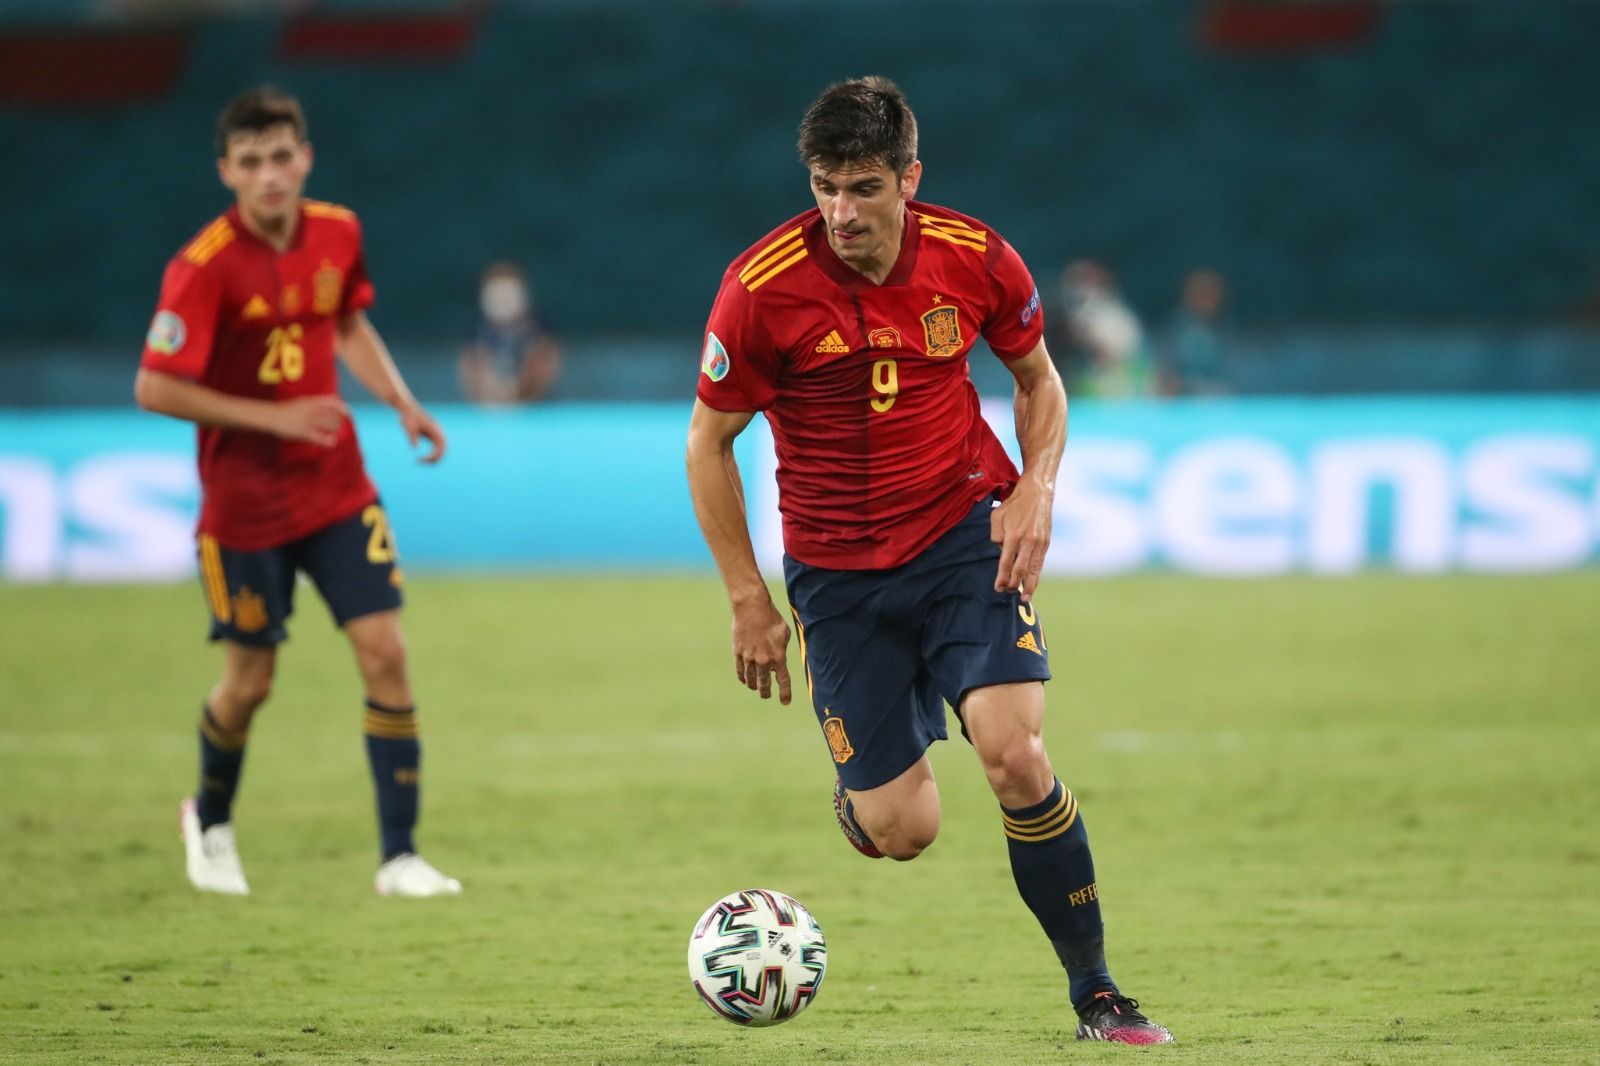 Euro 2020: Spain open their campaign with a draw against Sweden